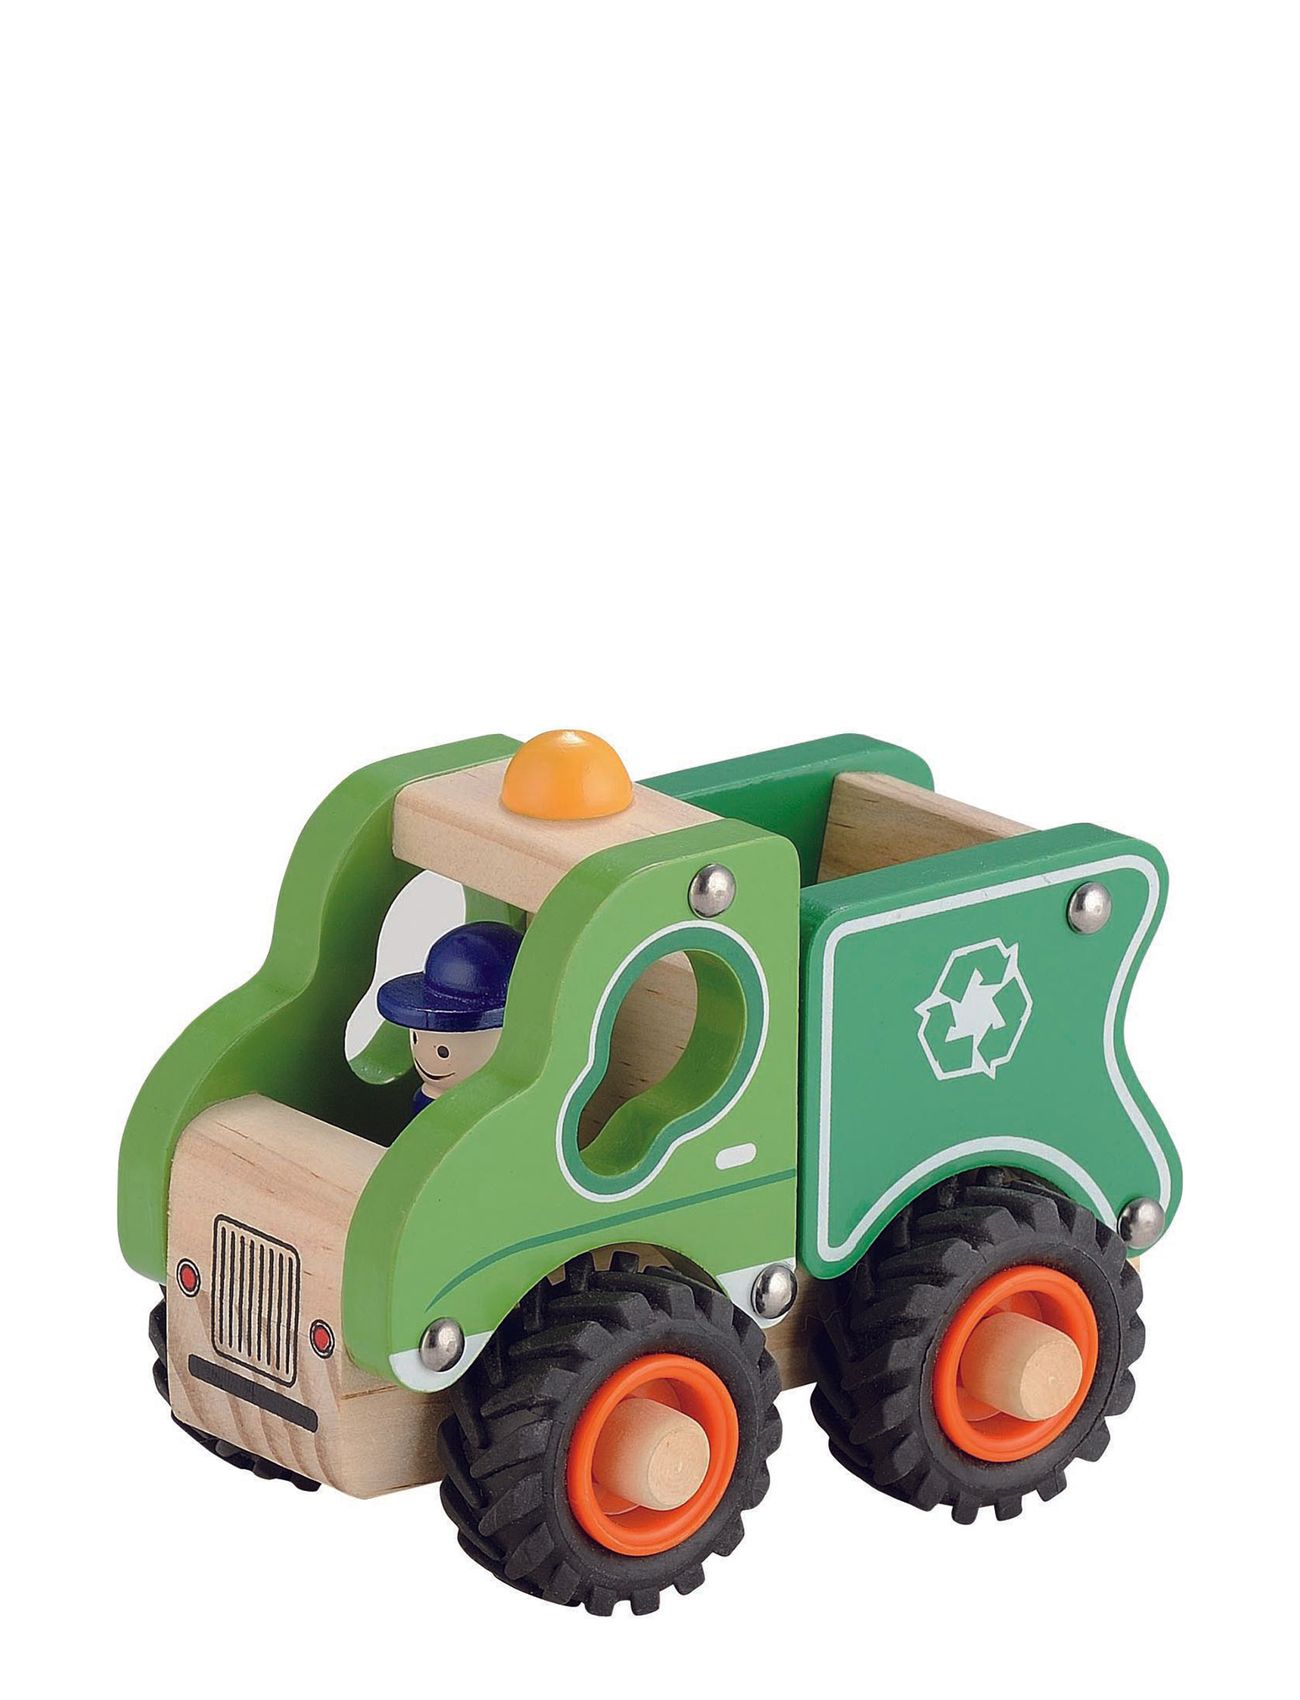 Wooden Garbage Truck With Rubber Wheels Toys Toy Cars & Vehicles Toy Cars Garbage Trucks Green Magni Toys